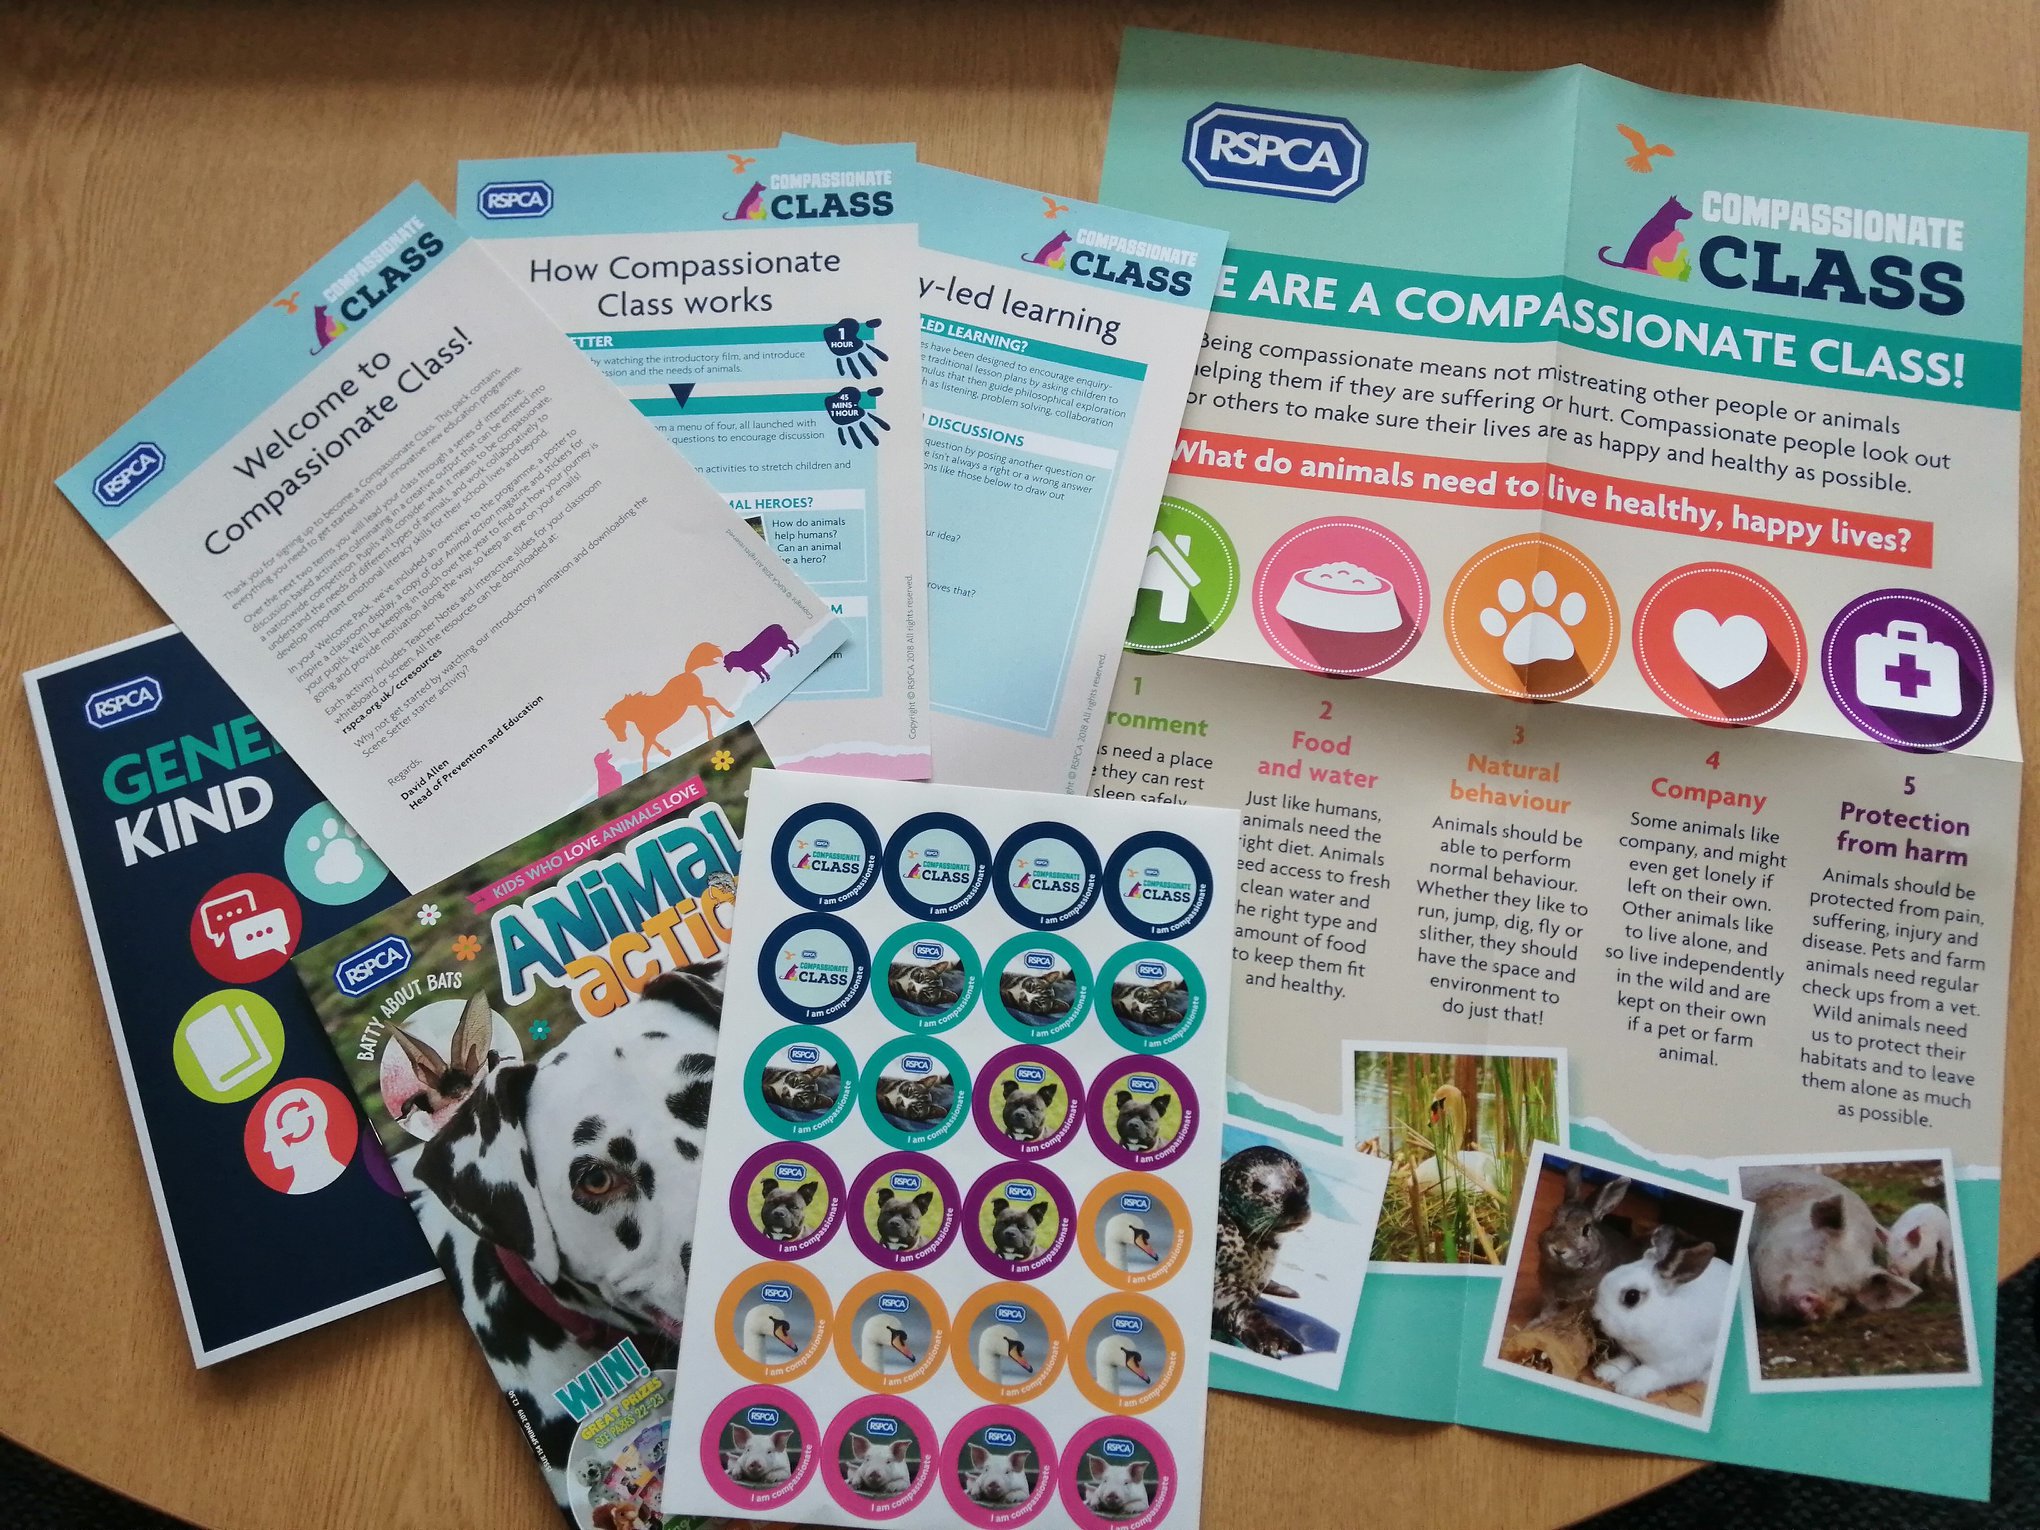 RSPCA Compassionate Class welcome pack